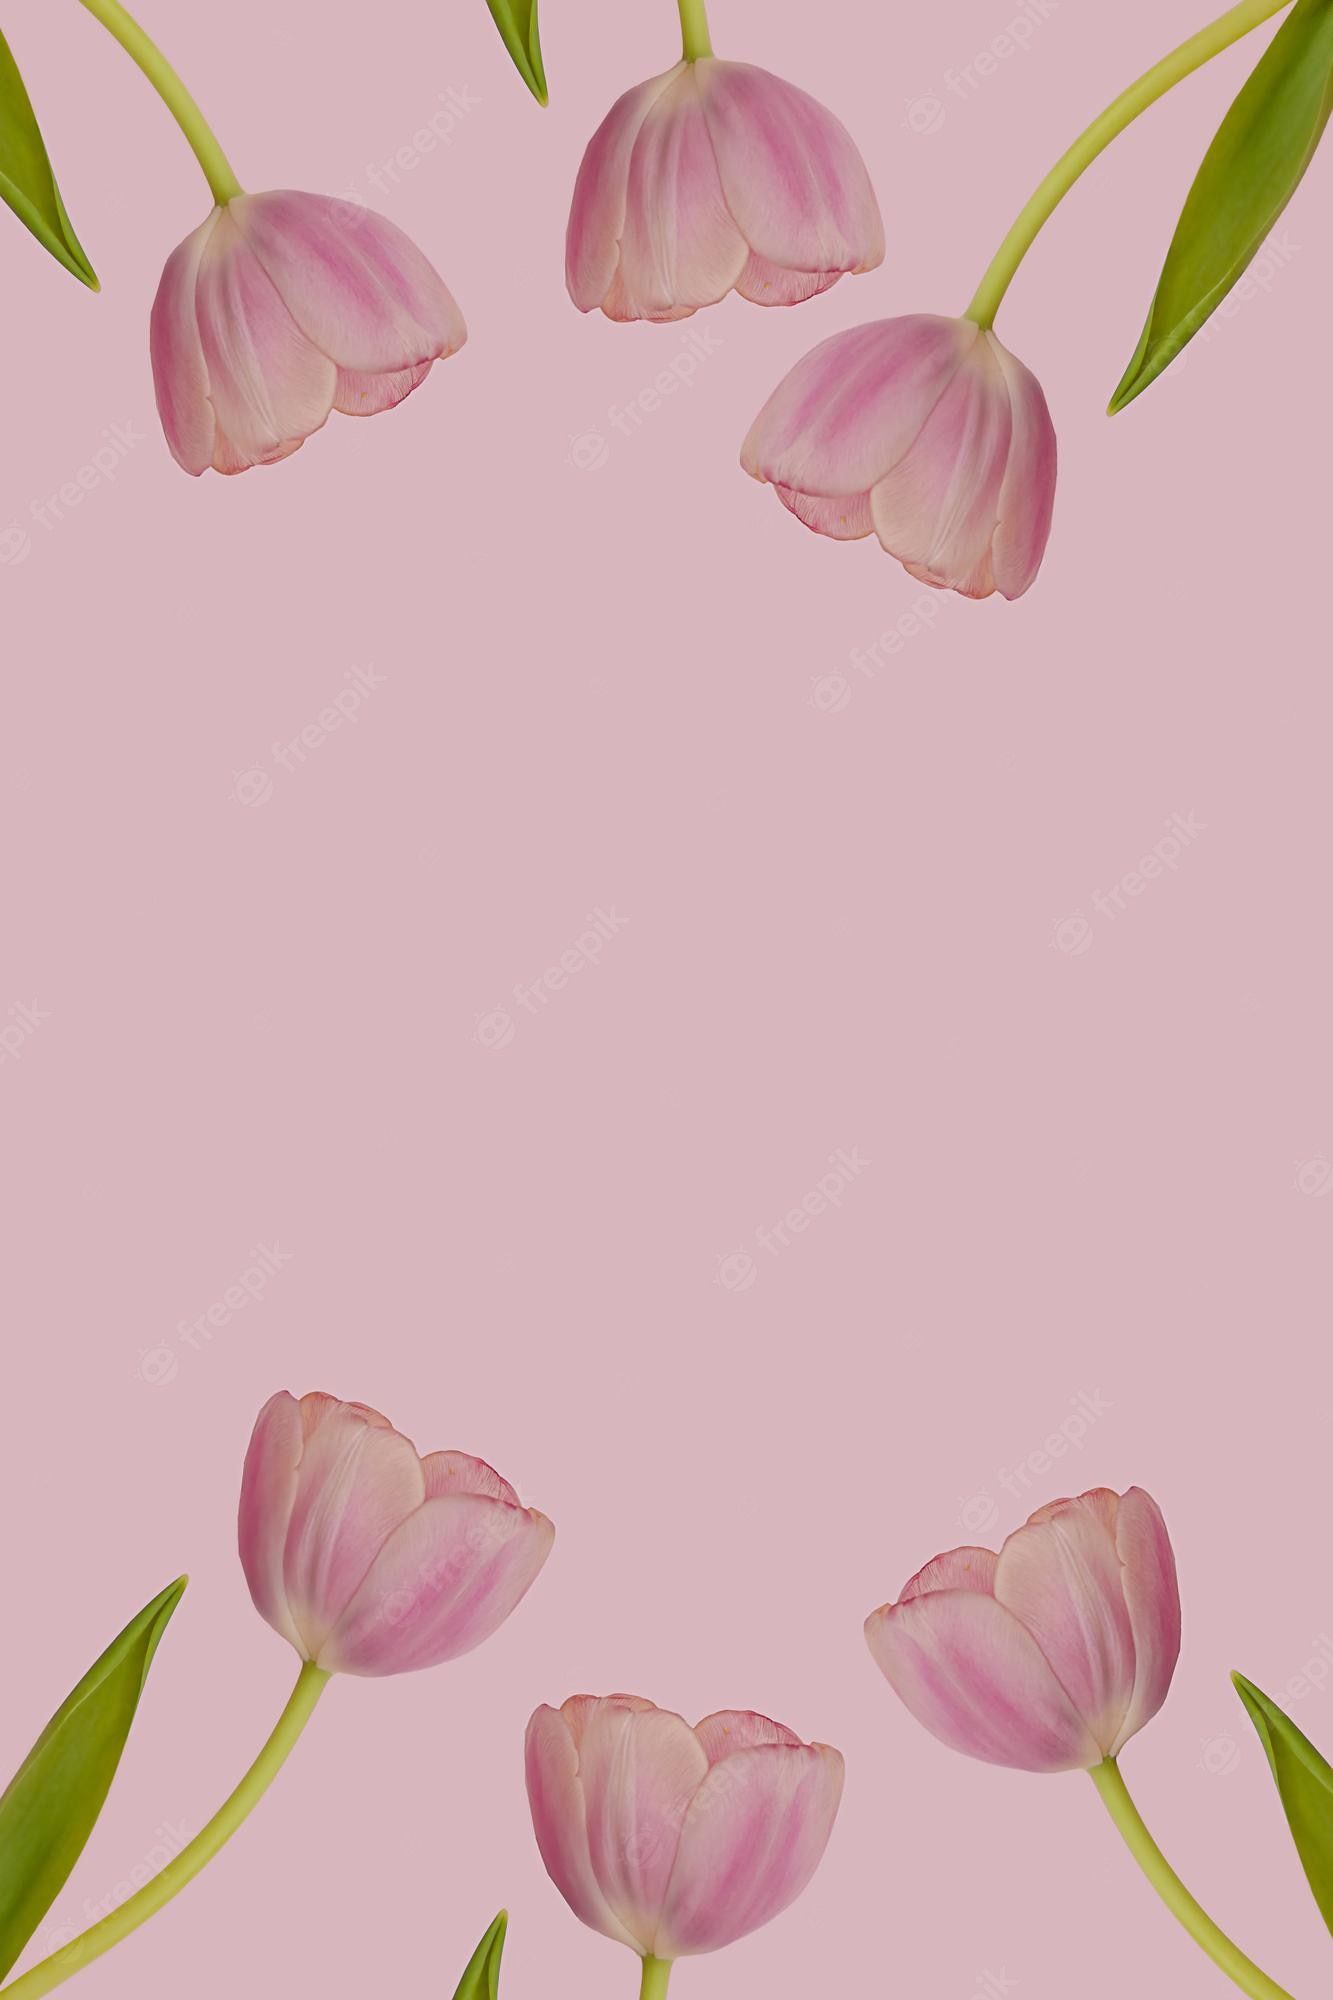 A frame of tulips on a pink background - Tulip